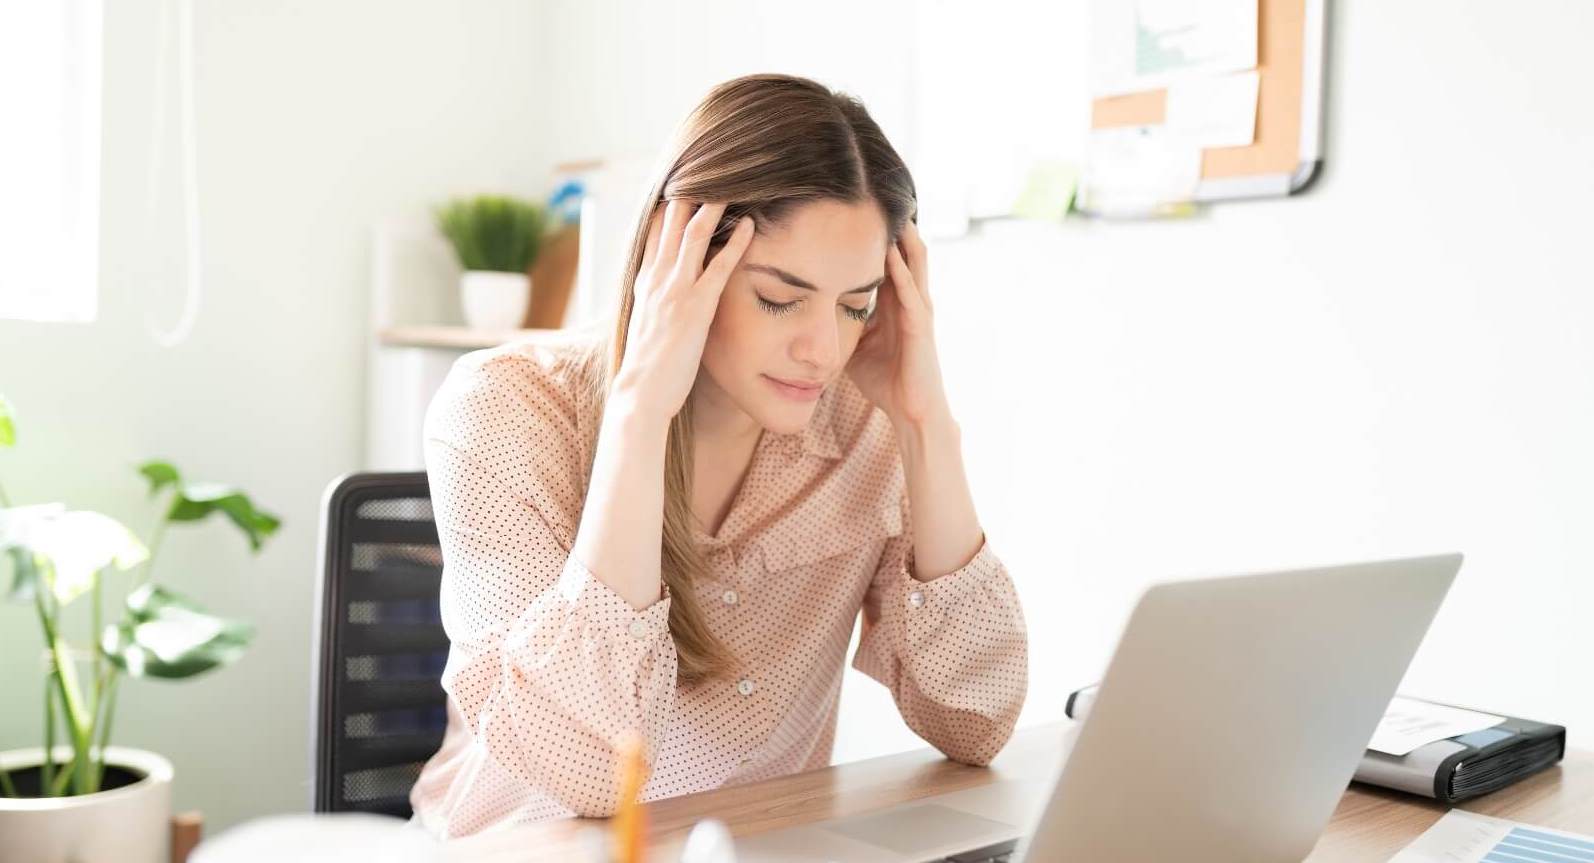 A woman sitting at her computer with her eyes closed and her hands on her head, showing signs of workplace stress.